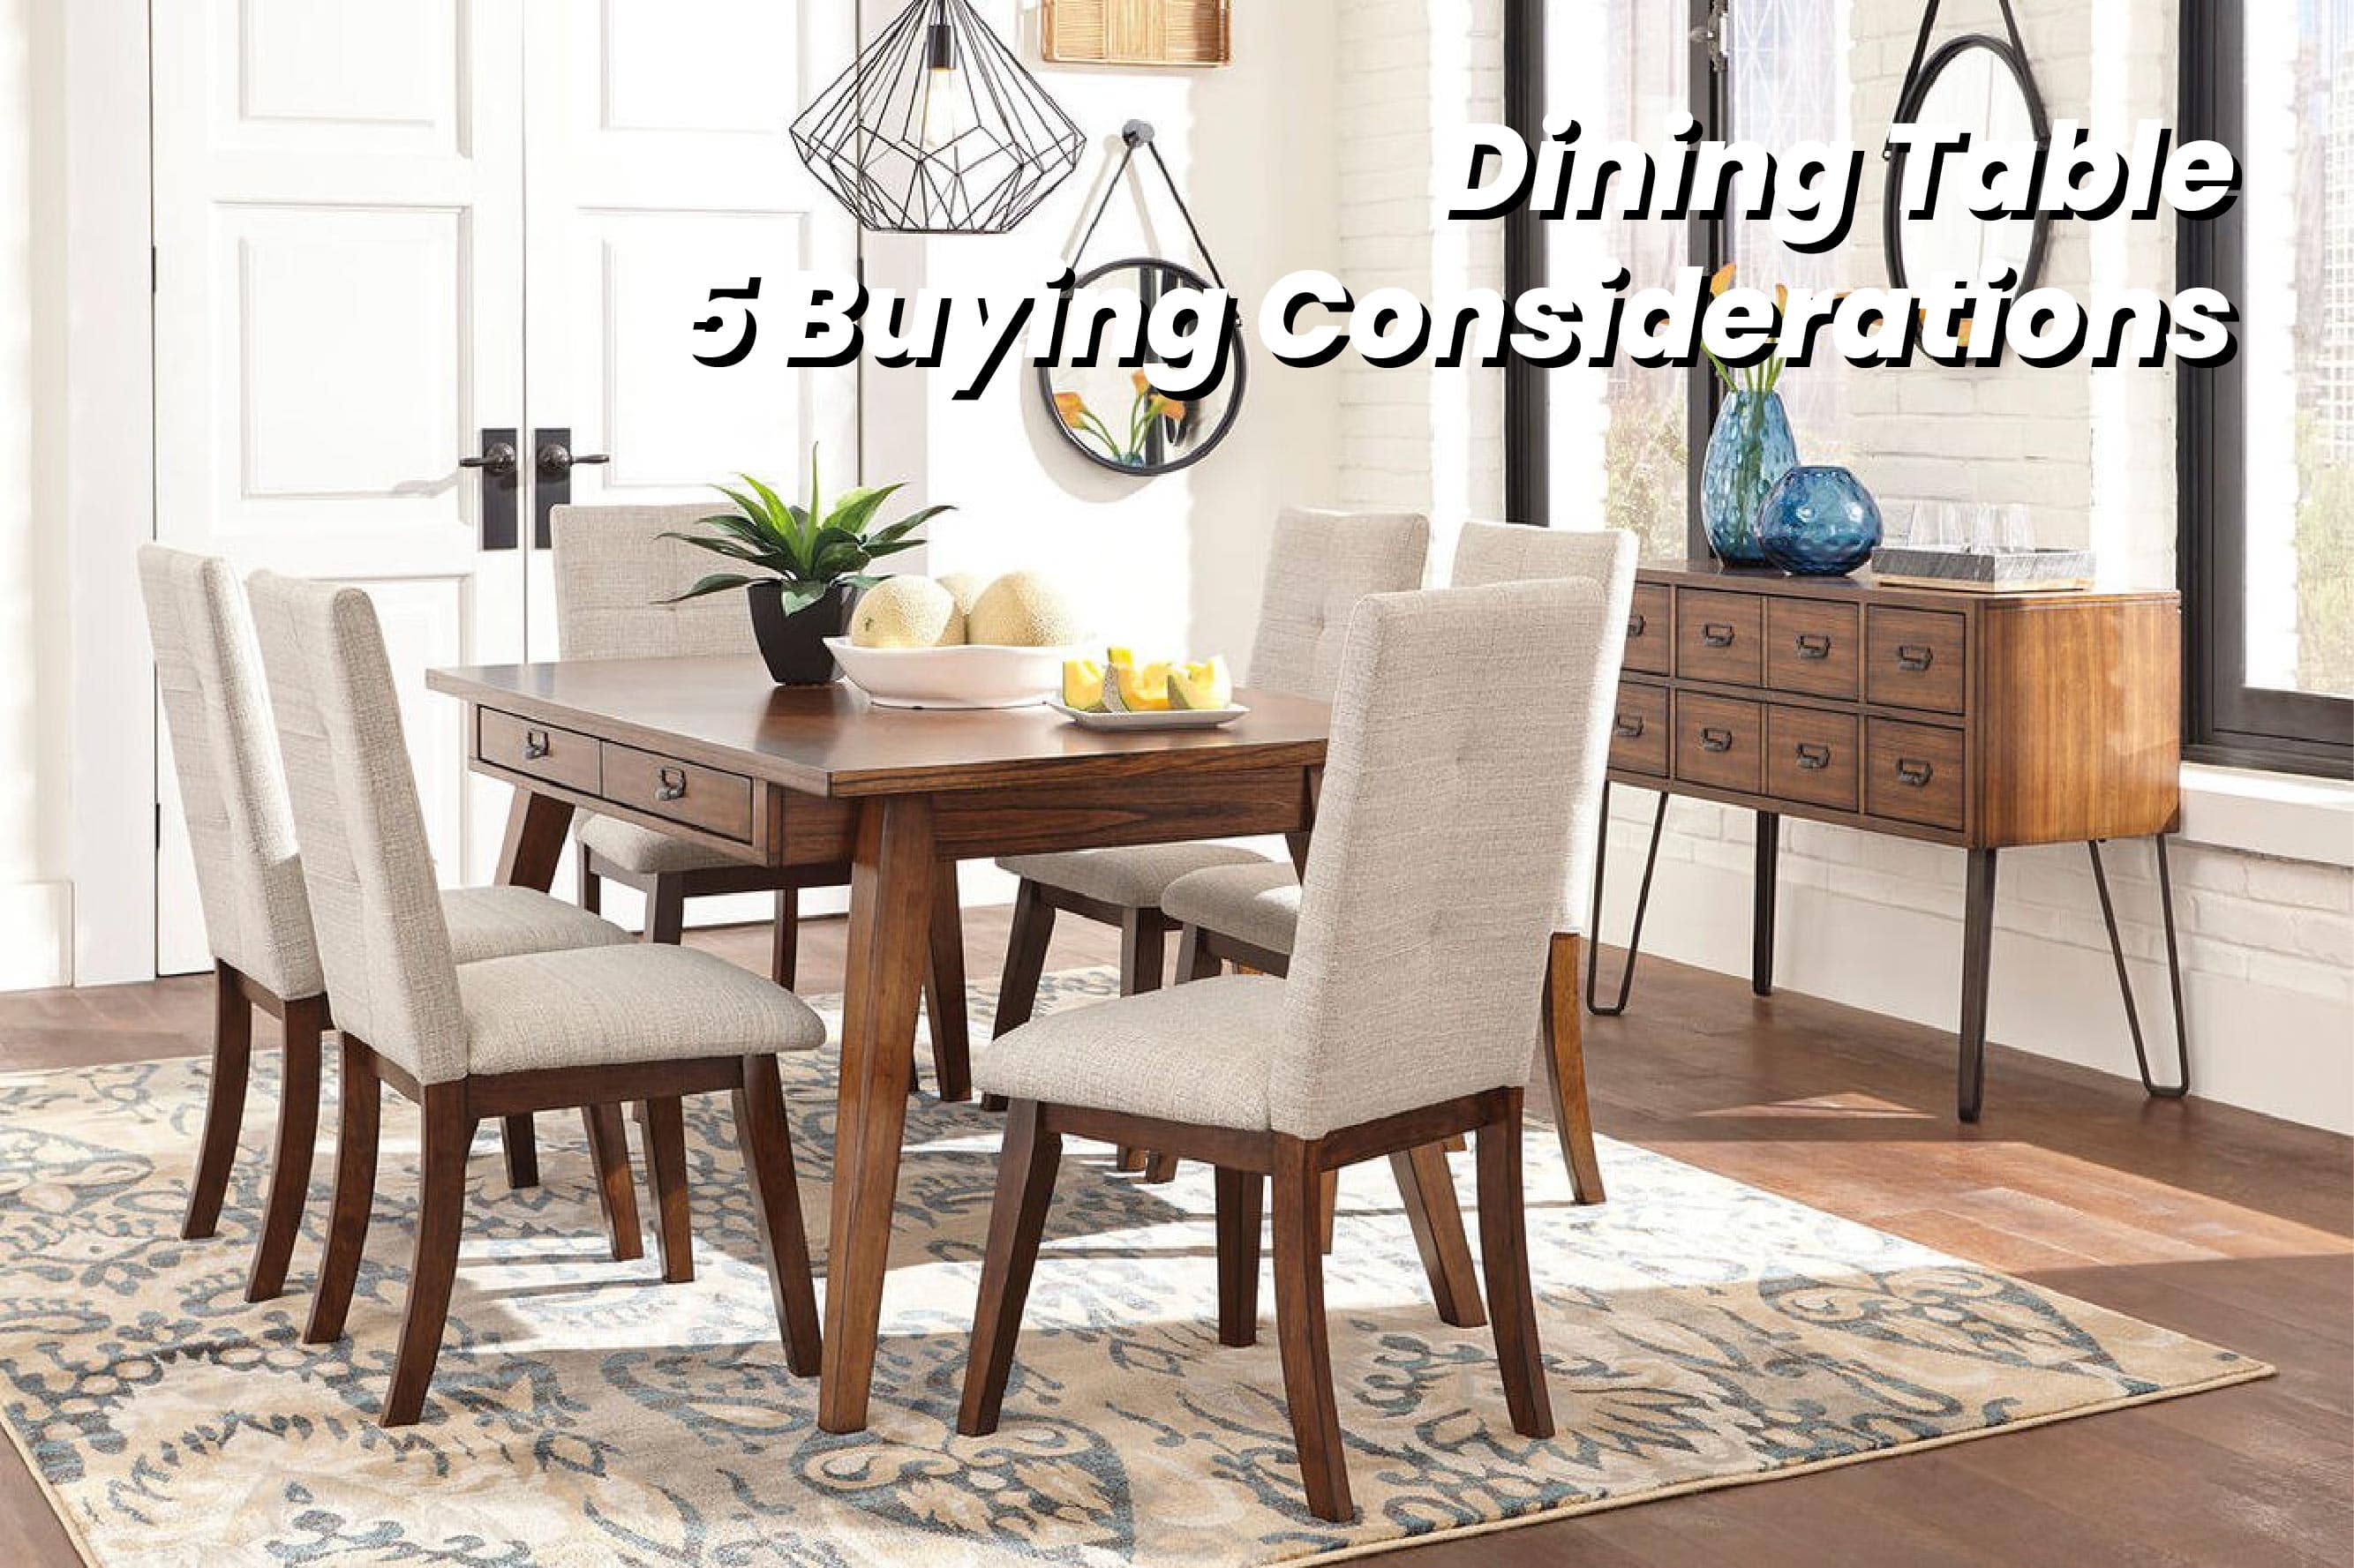 Dining Table – 5 Buying Considerations